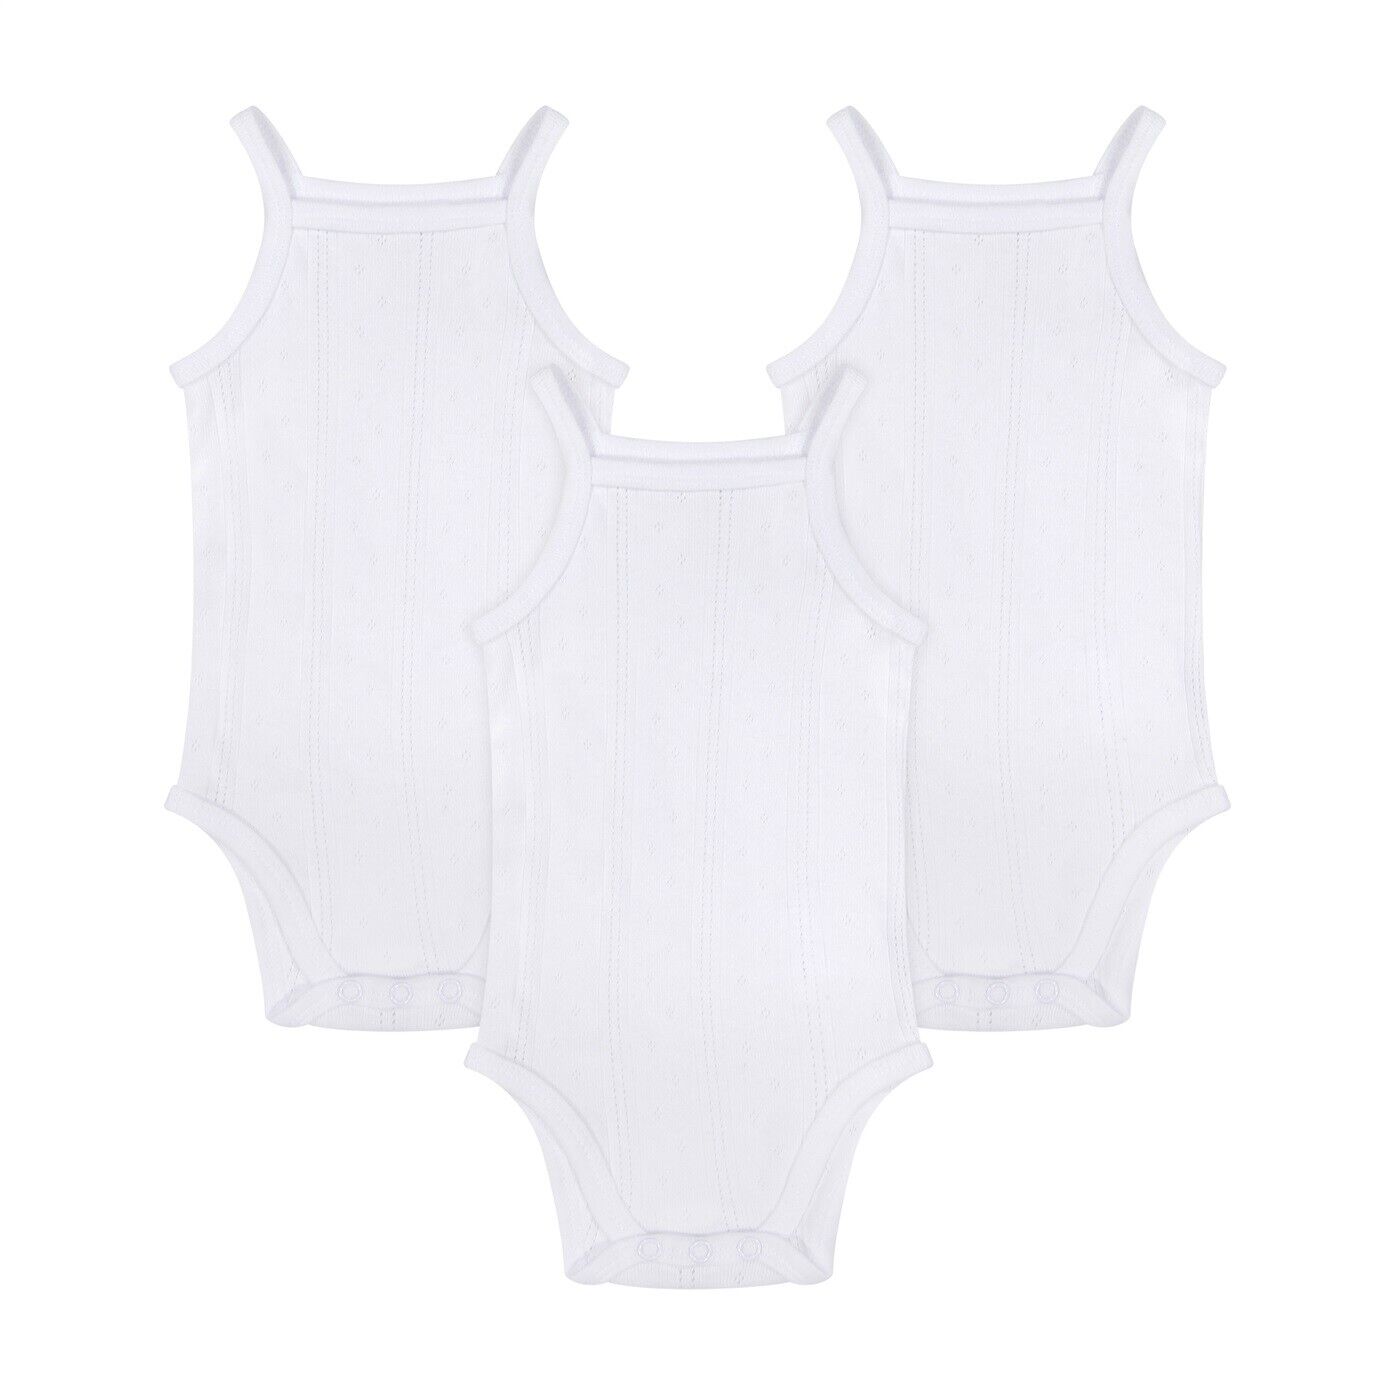 Buyless Fashion Baby Boy White Eyelet Camisole In Soft Cotton Colored Trim